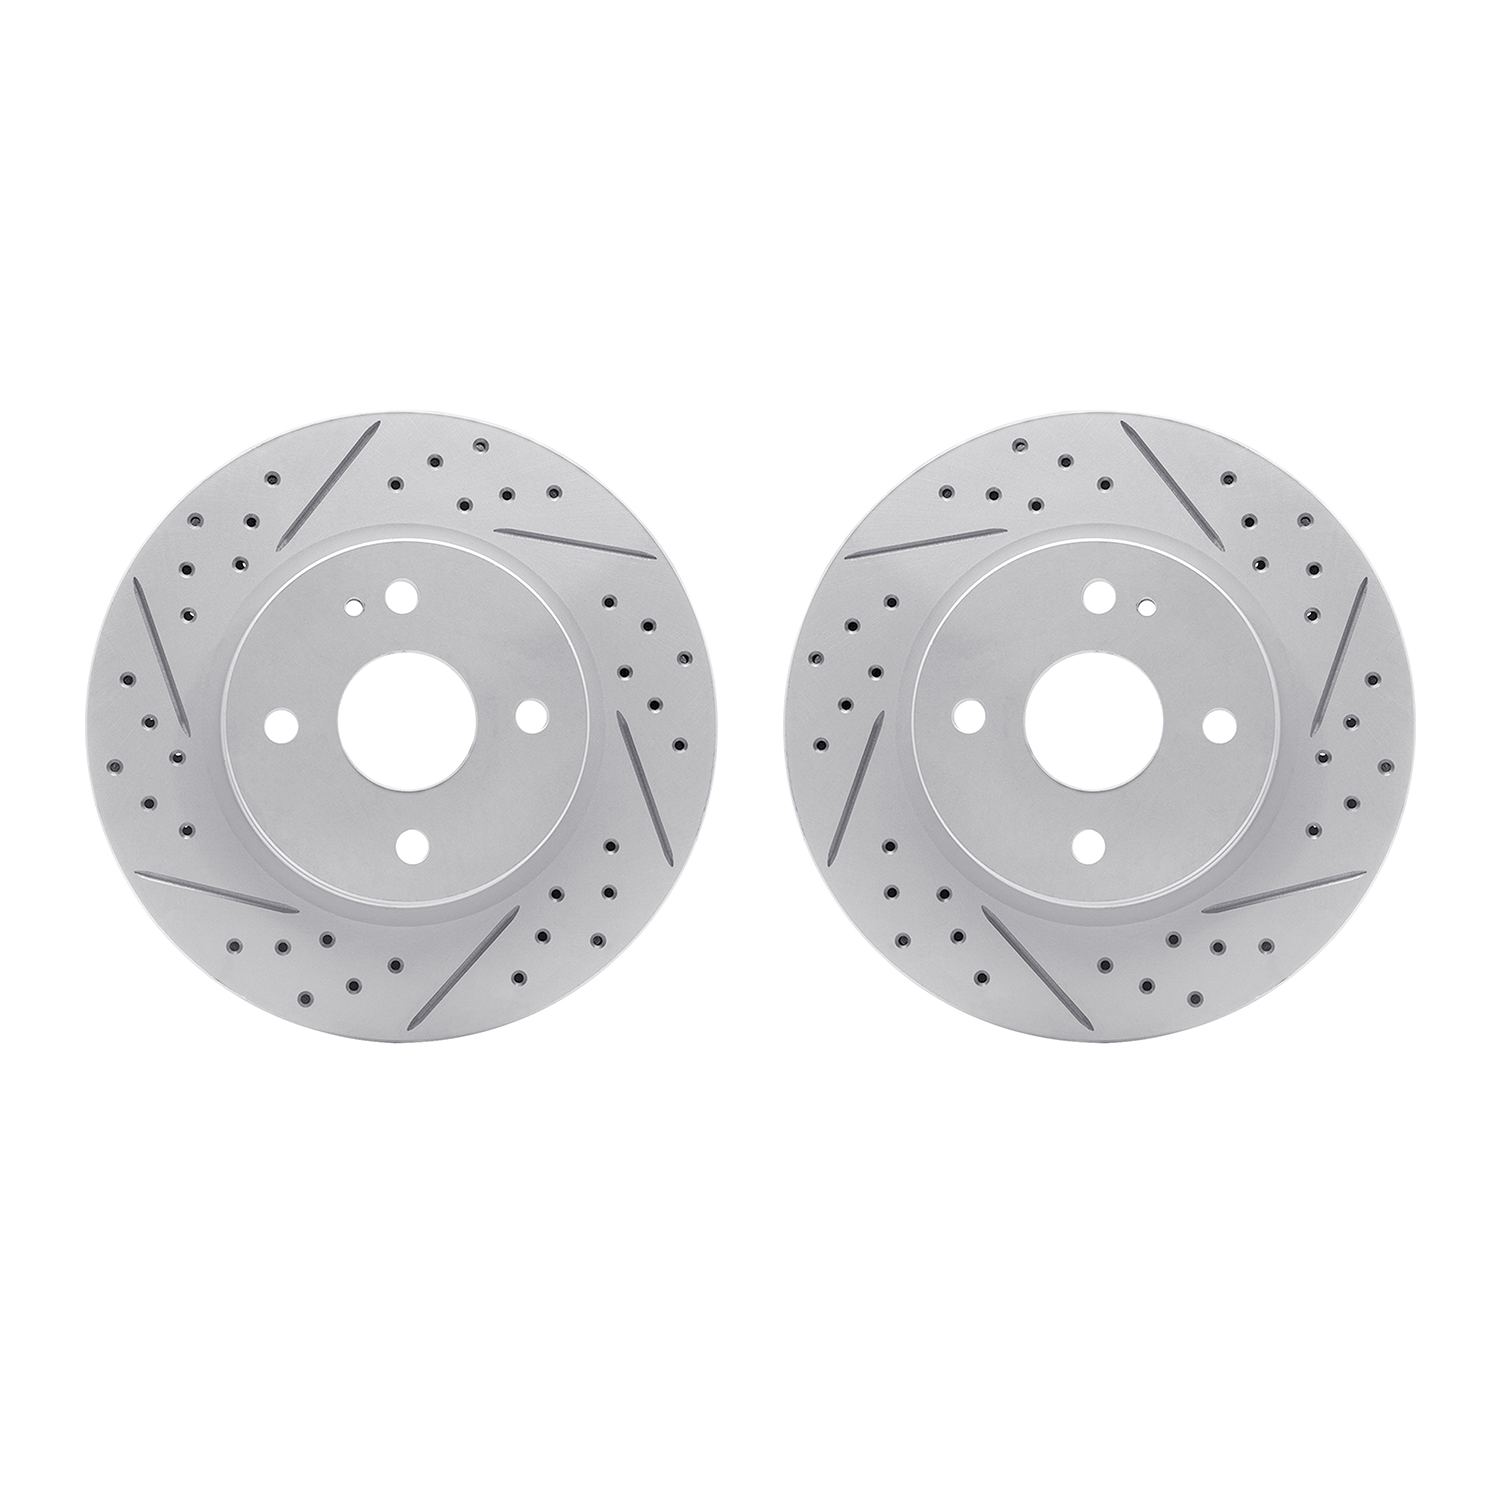 2002-80003 Geoperformance Drilled/Slotted Brake Rotors, 2011-2015 Ford/Lincoln/Mercury/Mazda, Position: Front